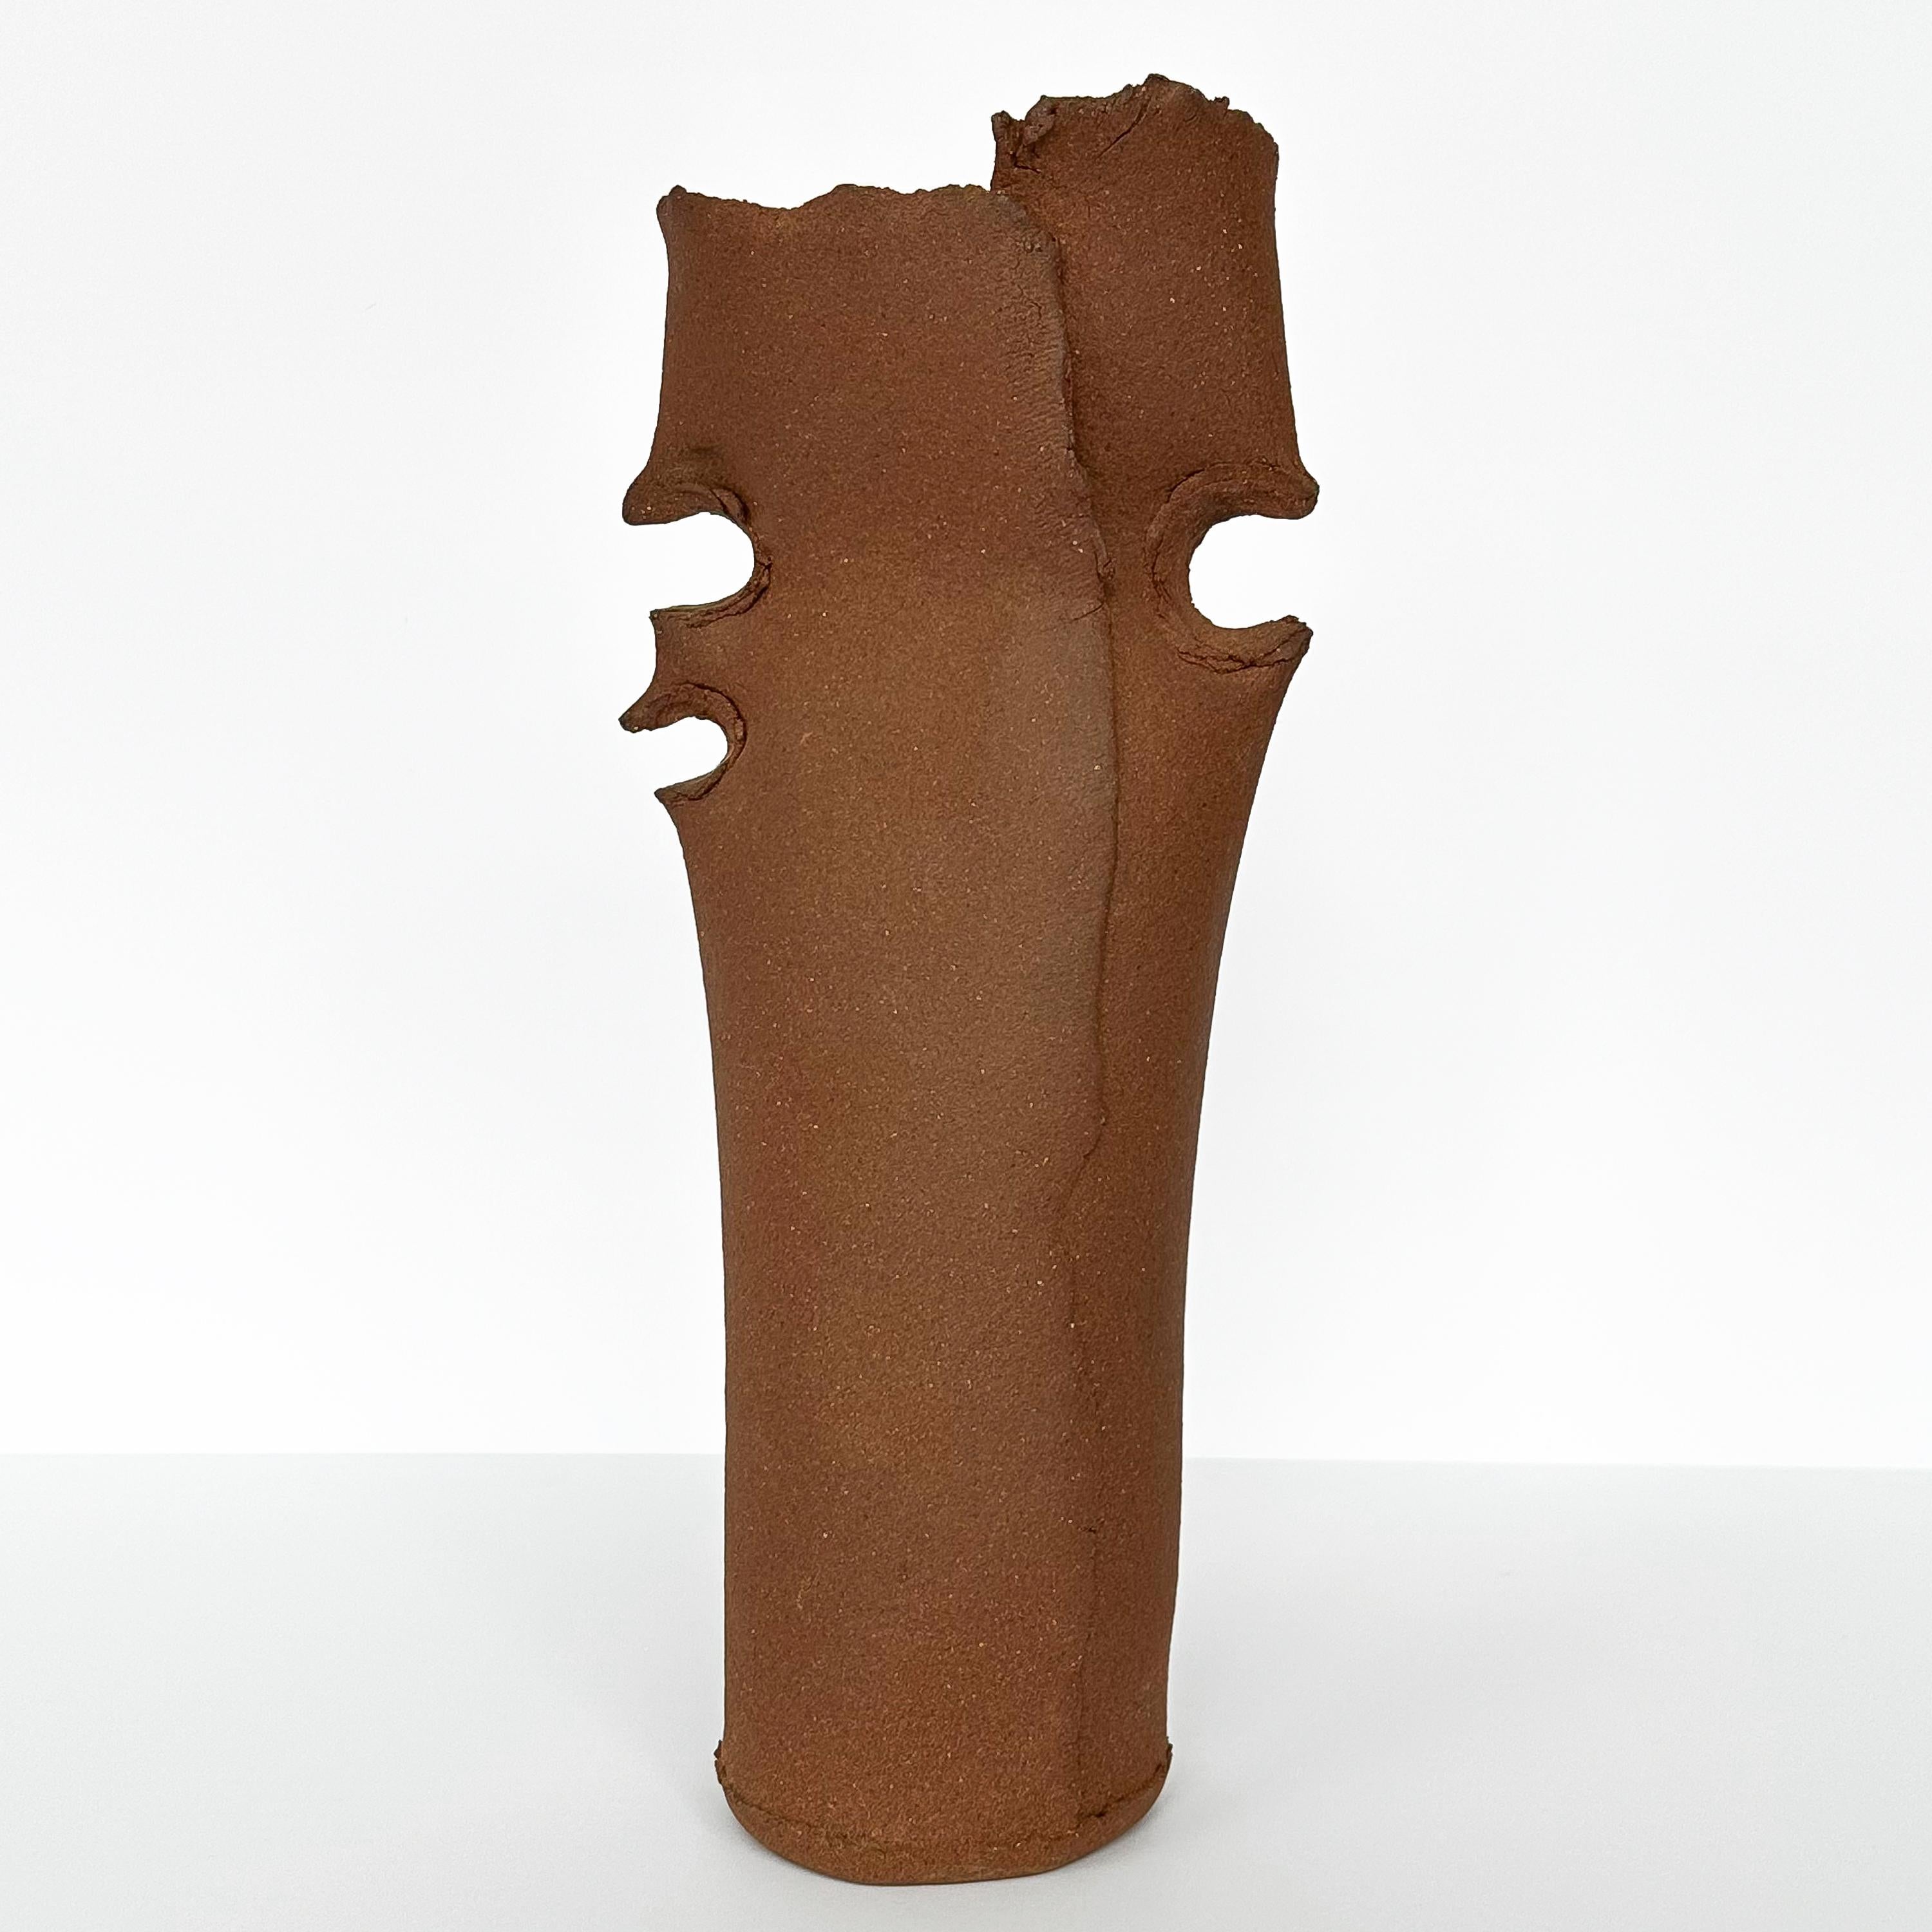 A Charles Lakofsky (1922-1993) unglazed stoneware studio pottery vase, circa 1970s. This Brutalist styled slab-built stoneware vase features a pinched design on both sides and a raw edge at the vase opening. Beautiful terracotta brown color. Signed